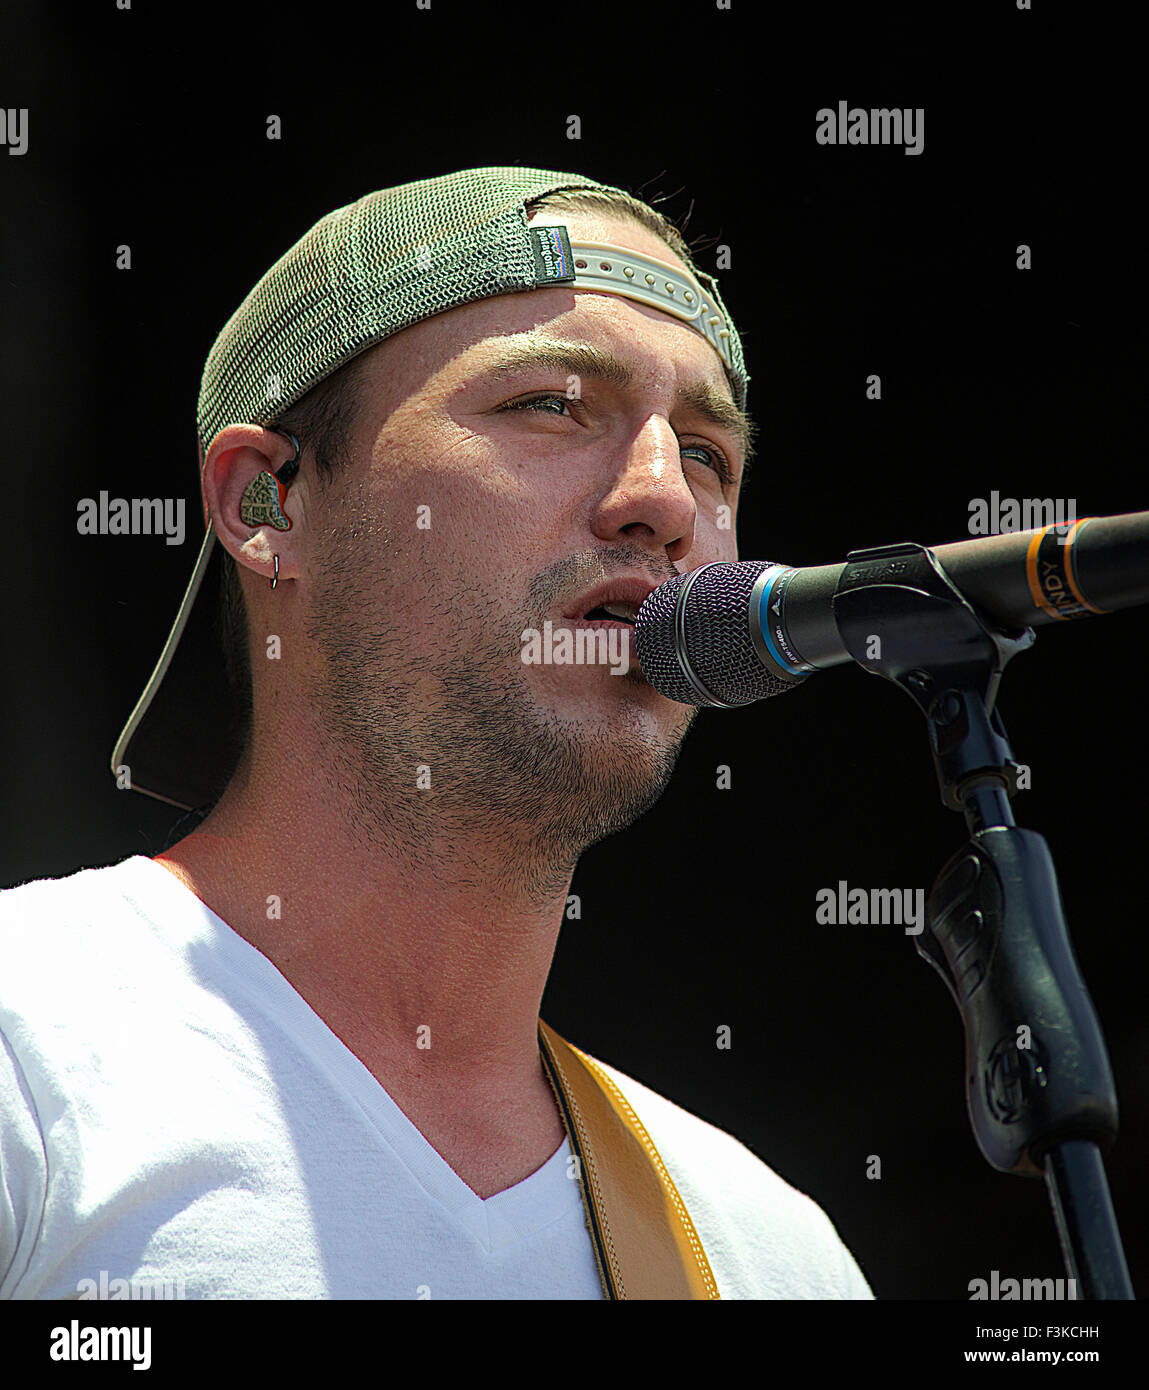 Manhattan, Kansas  6-28-2015 Eric Gunderson of Love and Theft performs at the Kicker Country Stampede in Manhattan, Kansas. Love and Theft is an American country music duo composed of Stephen Barker Liles and Eric Gunderson, both of whom sing lead vocals and play guitar. They originally formed as a trio in 2006 in Nashville, Tennessee, along with Brian Bandas (who also sang lead and played guitar). Signed to Lyric Street Records subsidiary Carolwood Records in 2009, Love and Theft made their chart debut in early 2009 with the single 'Runaway,' which reached the Top 10 on Billboard Hot Country Stock Photo